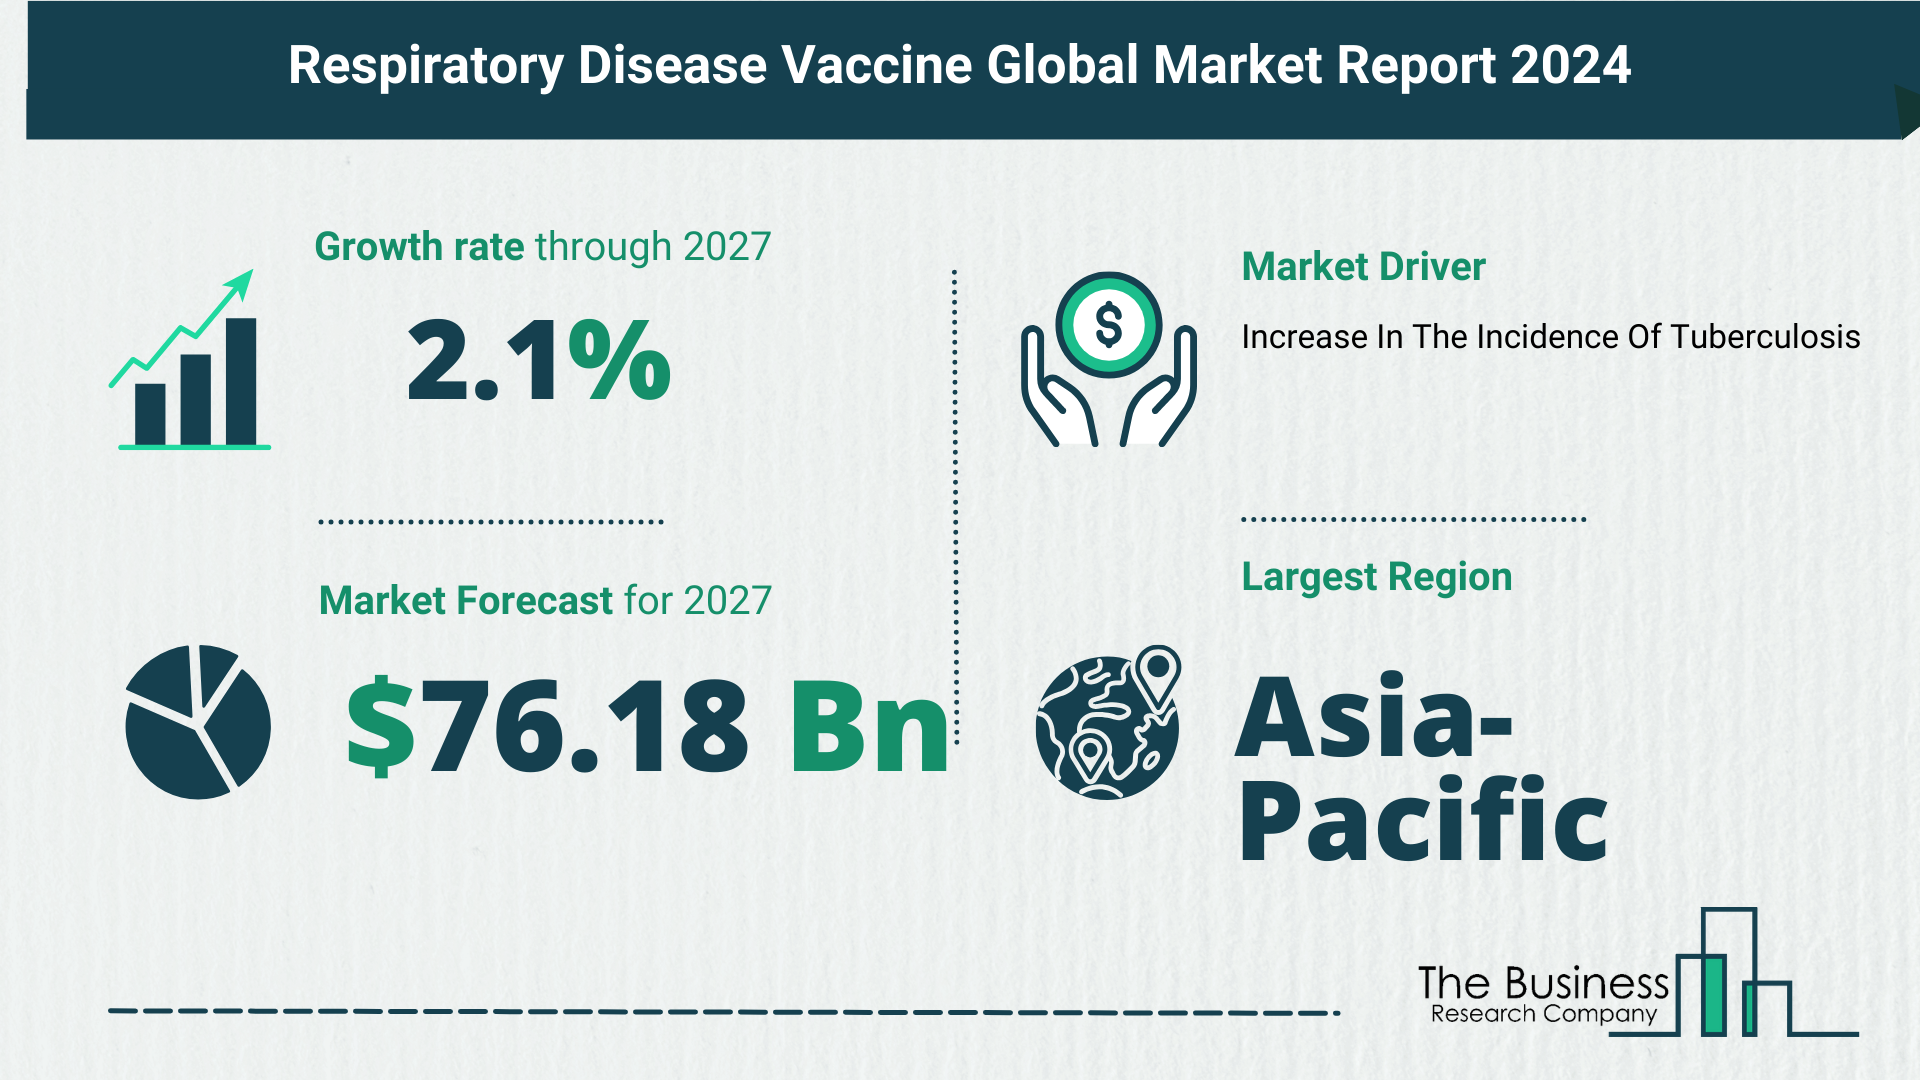 What Is The Forecast Growth Rate For The Respiratory Disease Vaccine Market?